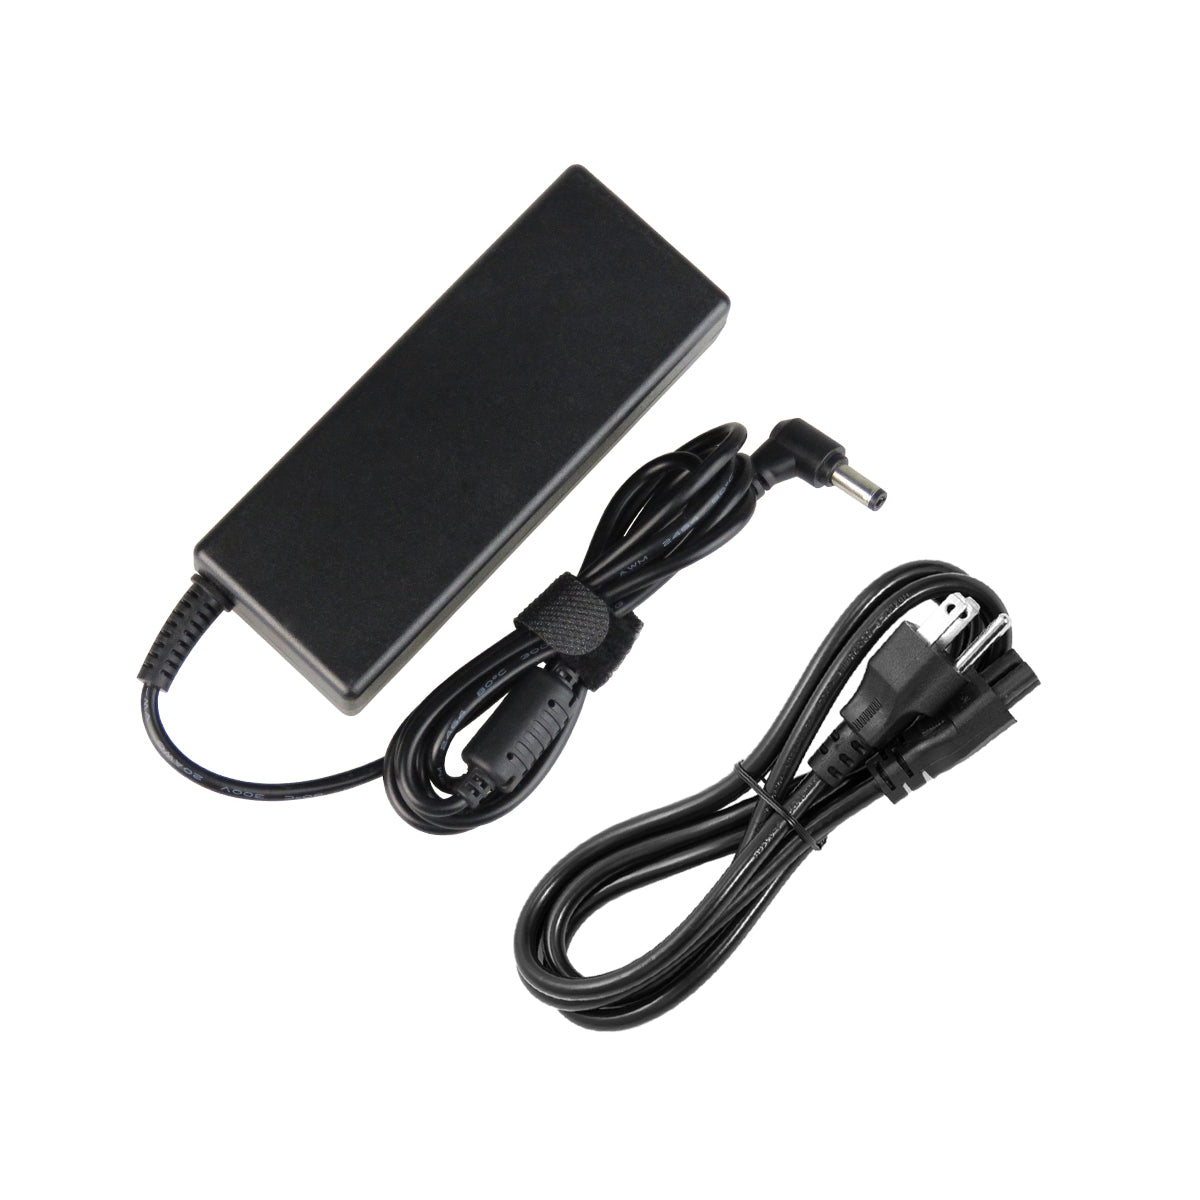 AC Adapter Charger for ASUS u80 Series Notebook.